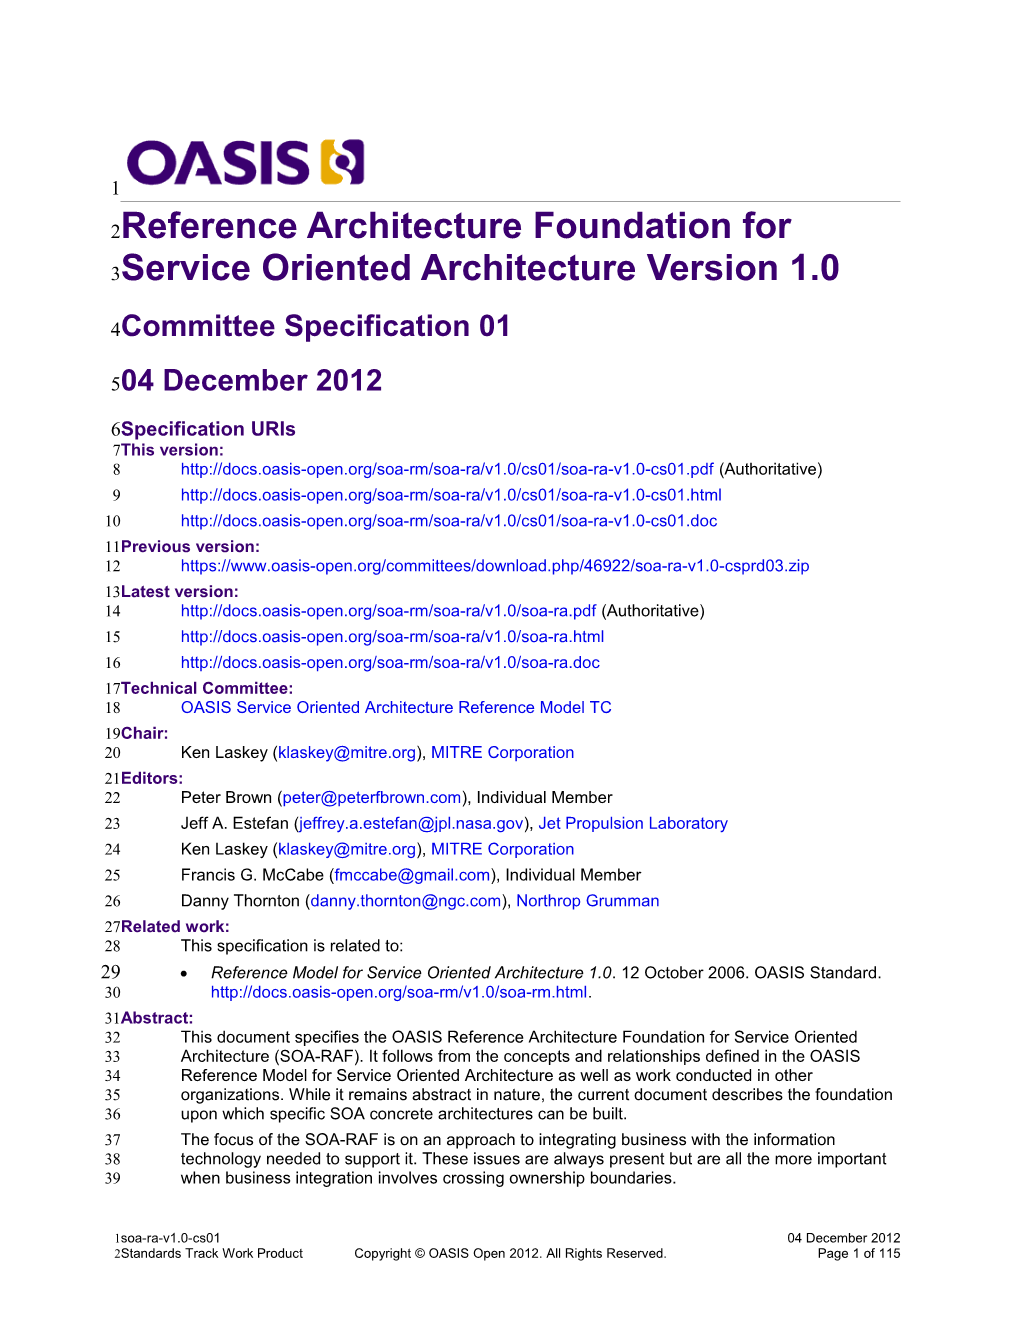 Reference Architecture Foundation for Service Oriented Architecture Version 1.0